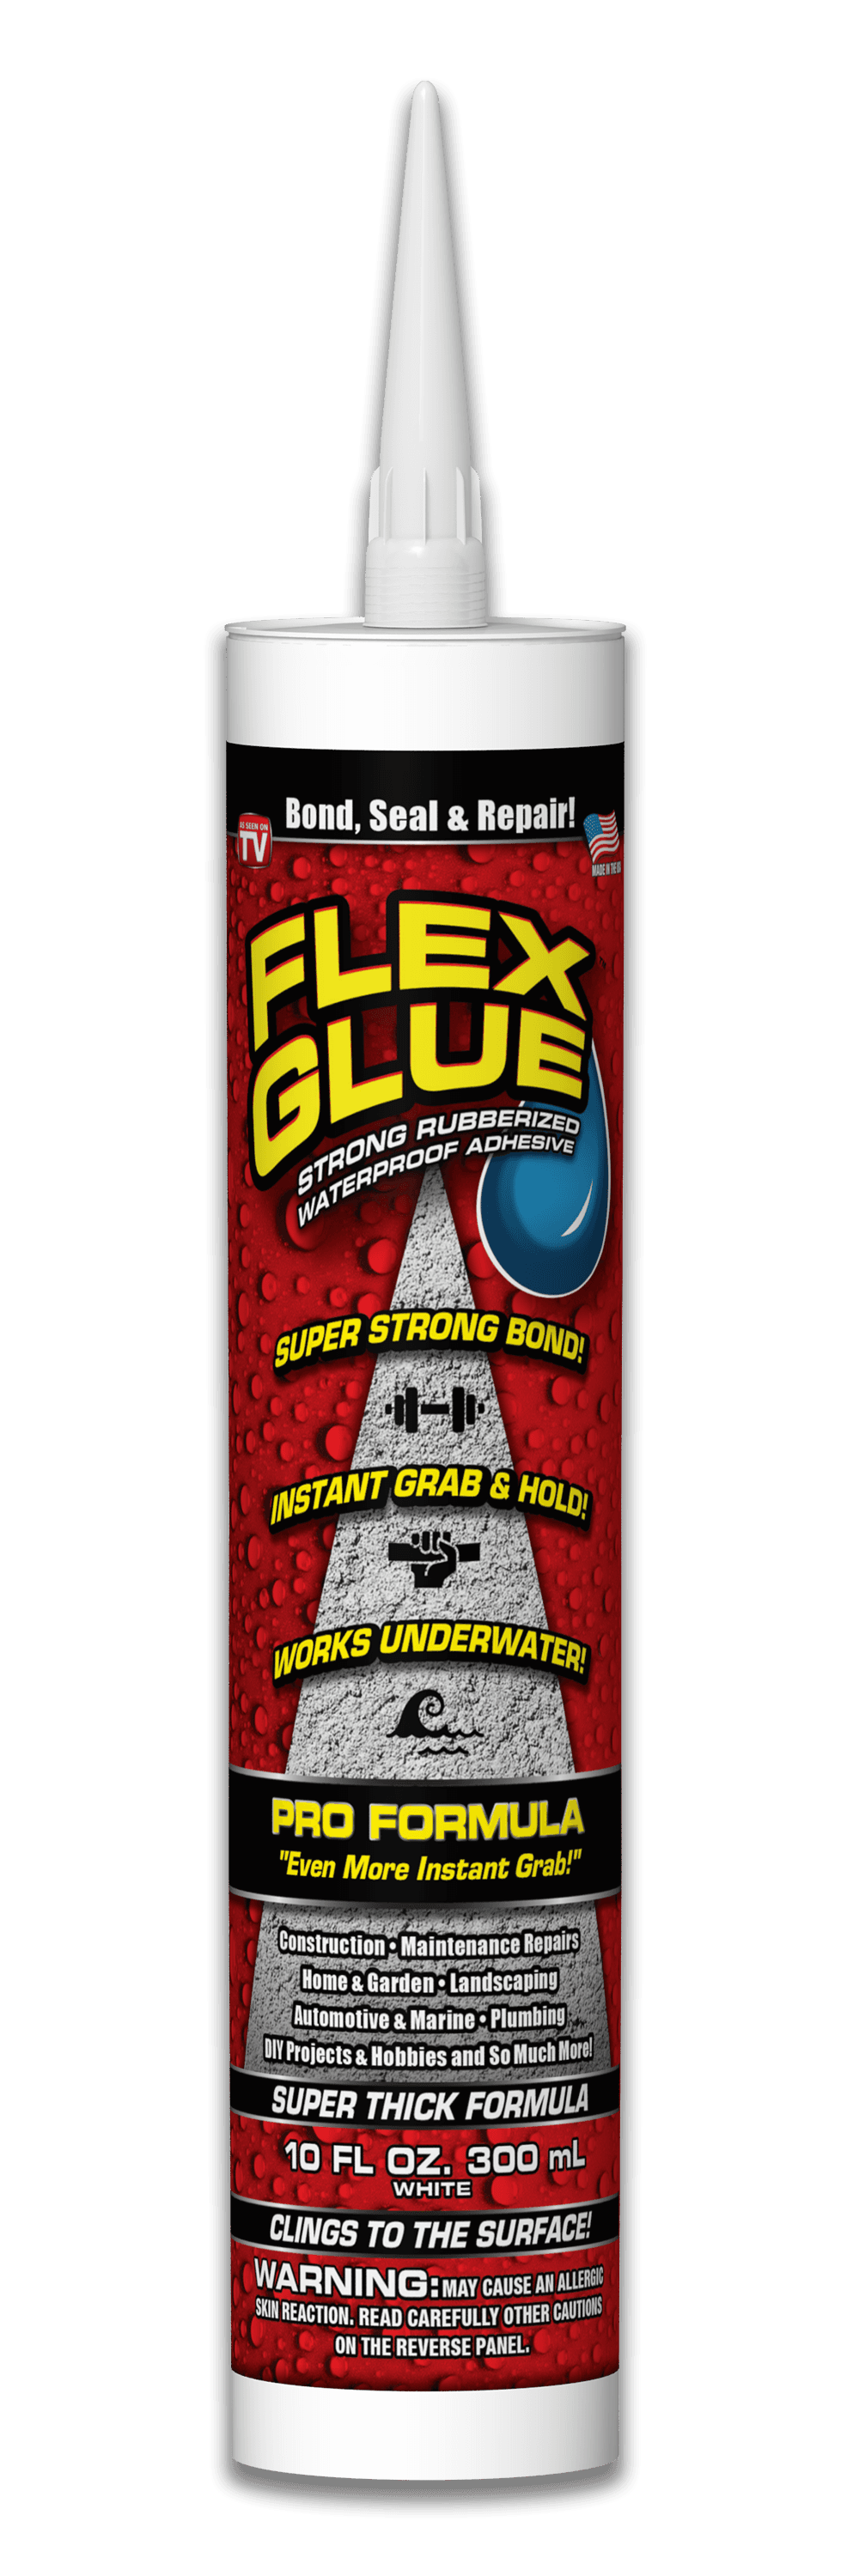 Flex Glue Clear Strong Rubberized Waterproof Adhesive - 4 oz